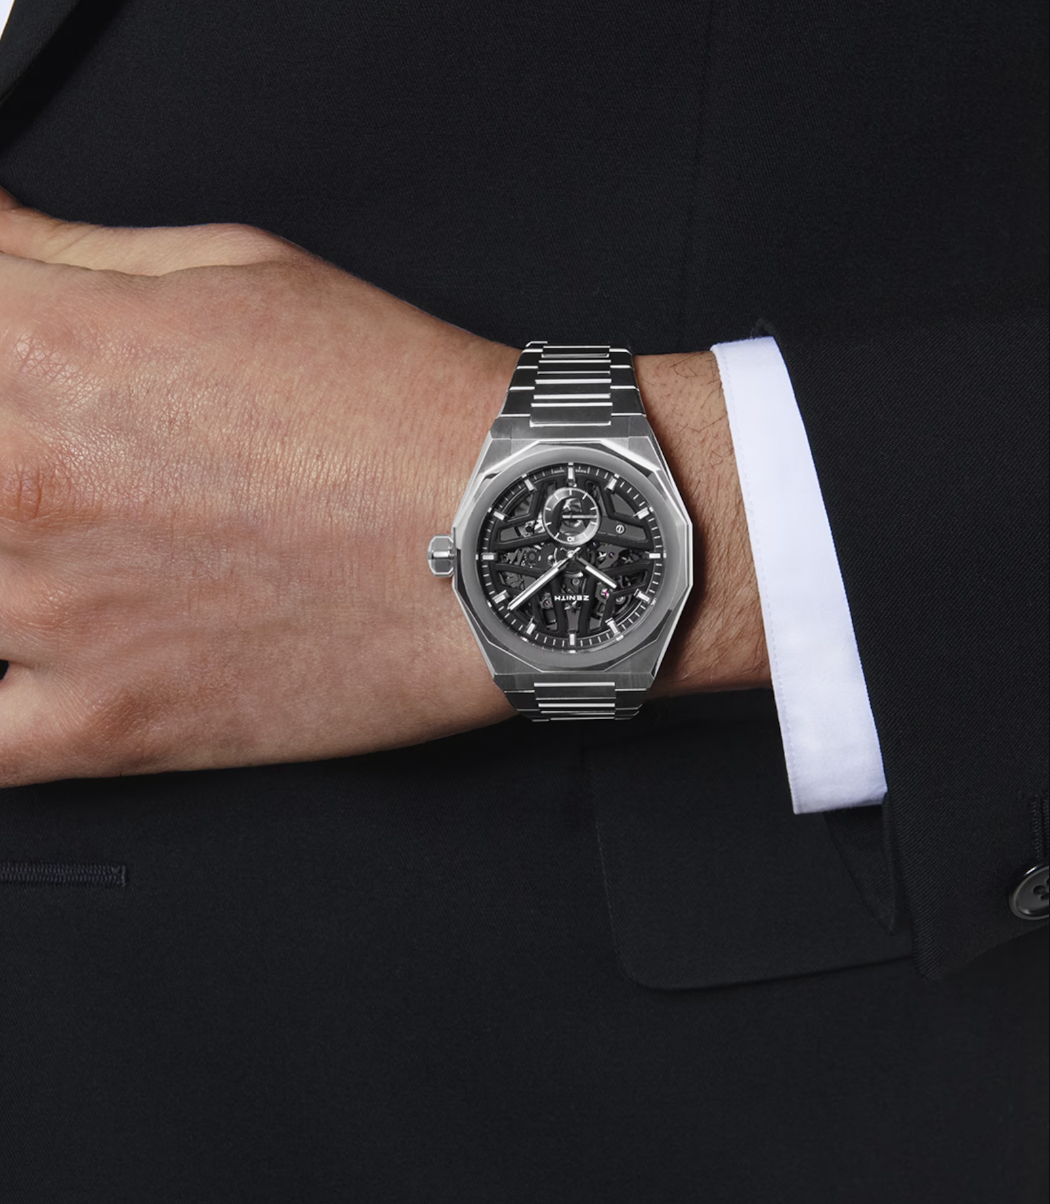 The new Zenith Defy Skyline Skeleton - Today on the wrist - An